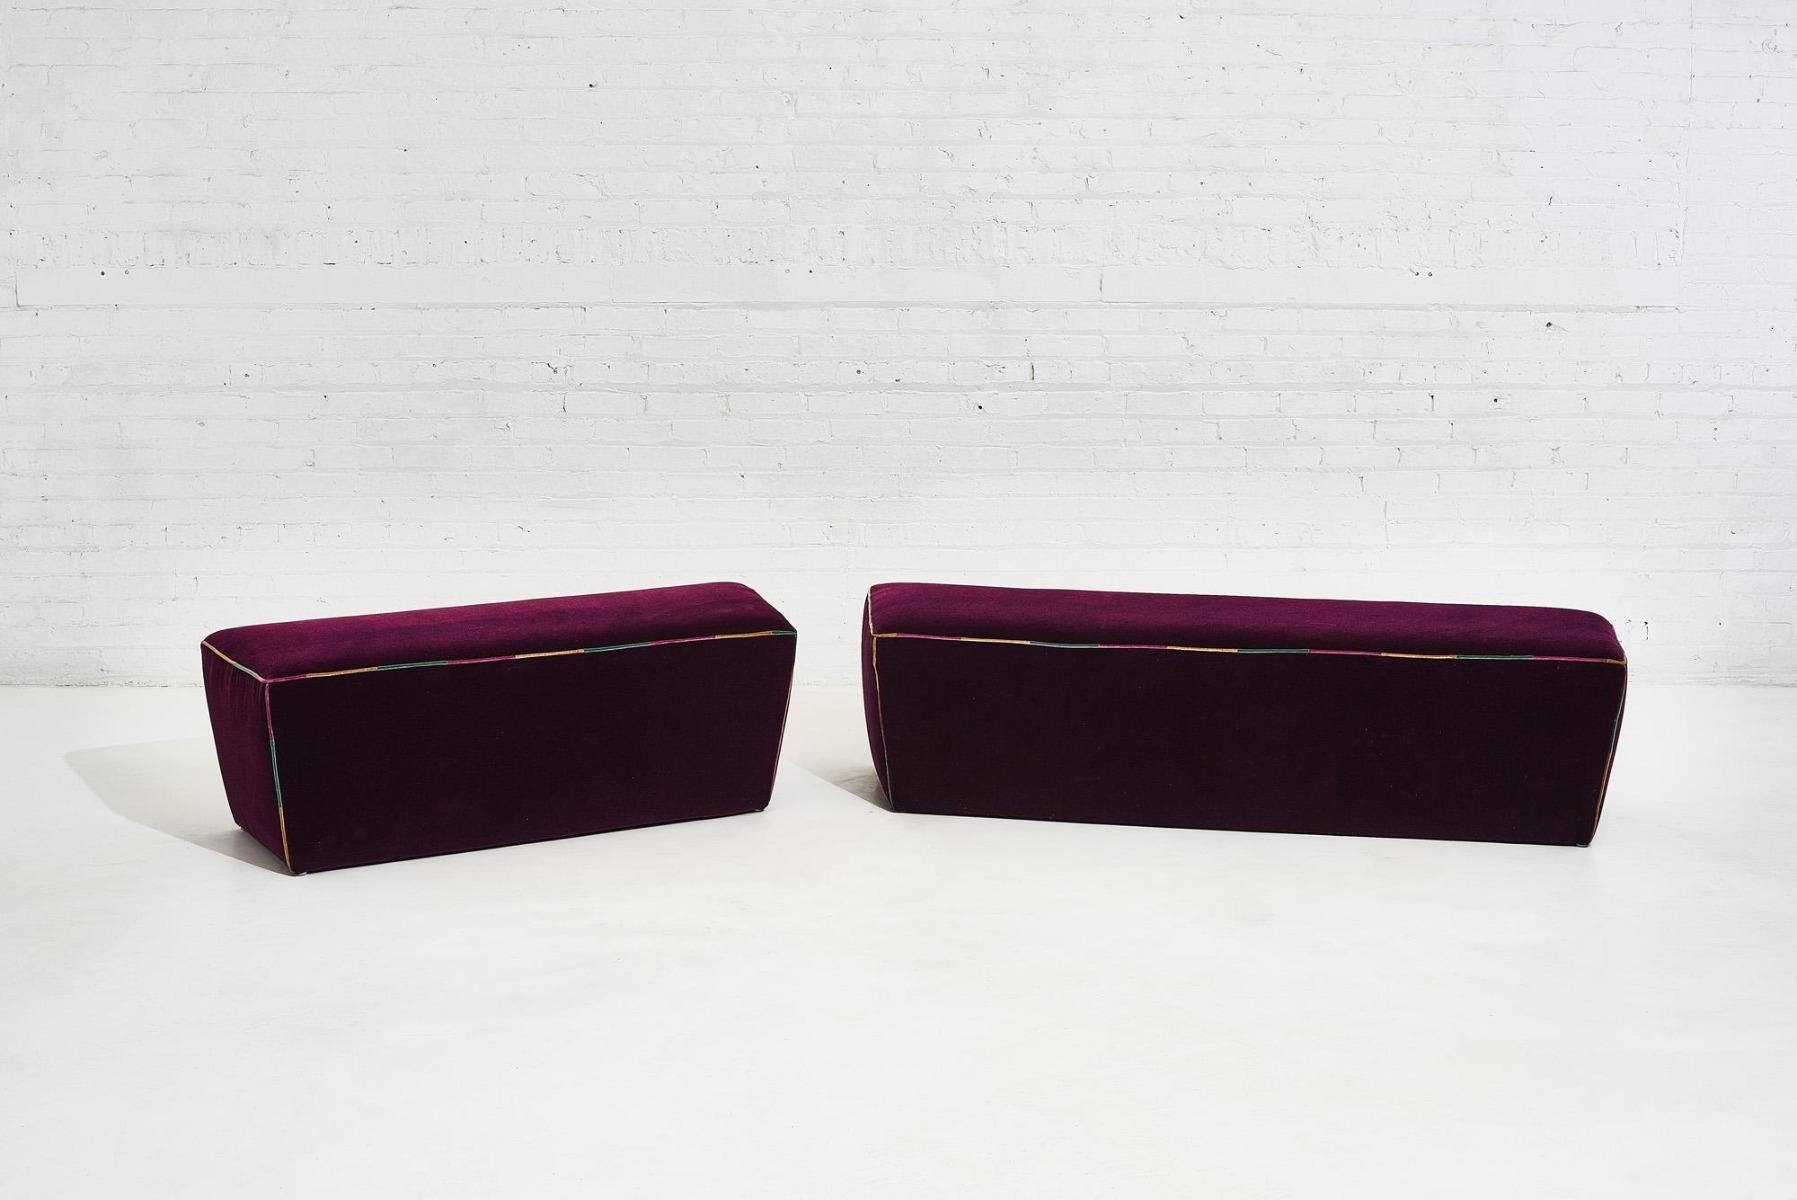 1970 angular post modern benches. One bench is slightly bigger than the other. All original purple mohair.